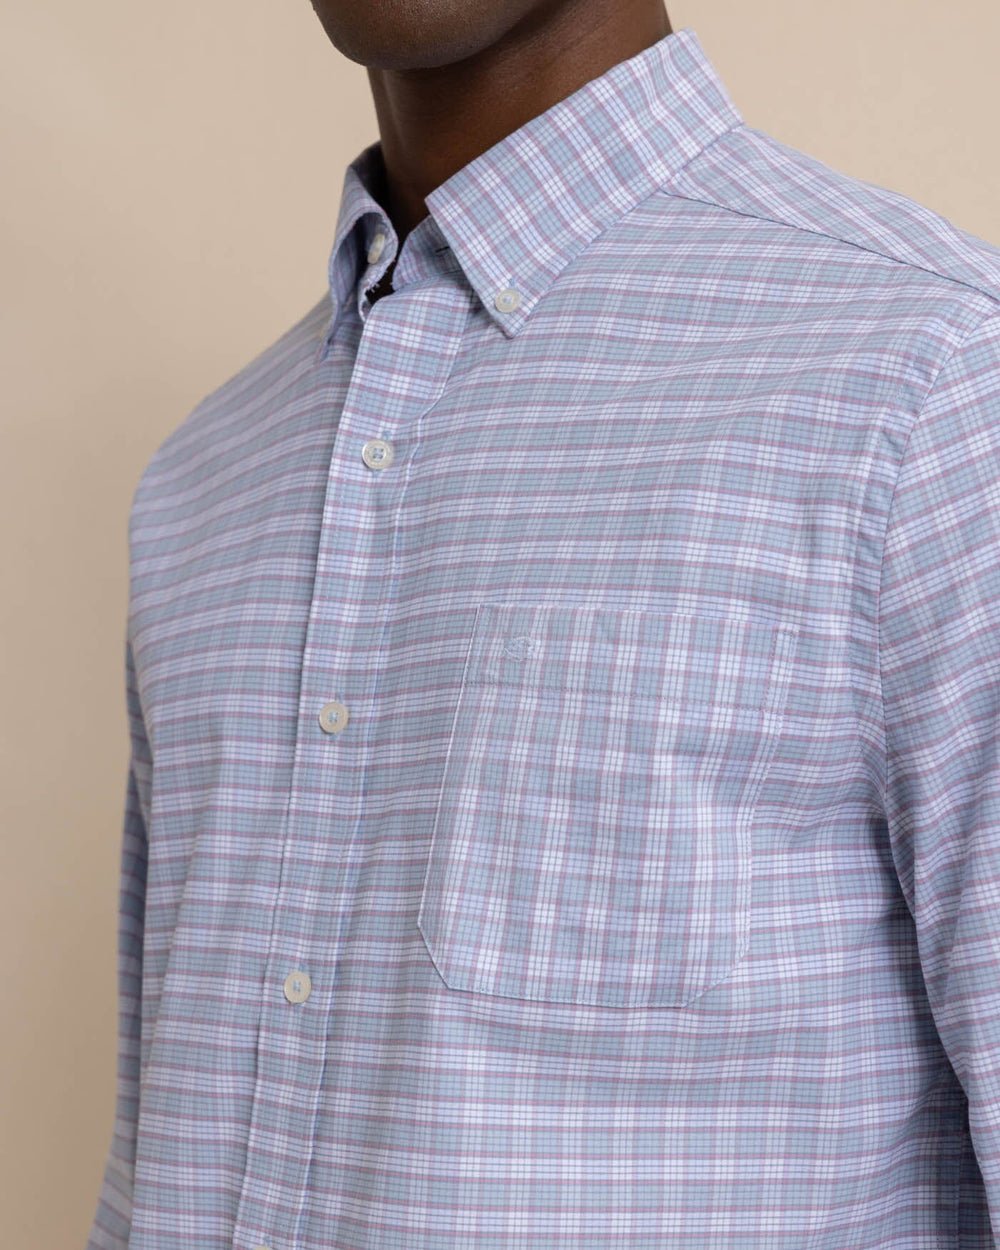 The detail view of the Southern Tide Coastal Passage Trailside Plaid Long Sleeve SportShirt by Southern Tide - Subdued Blue